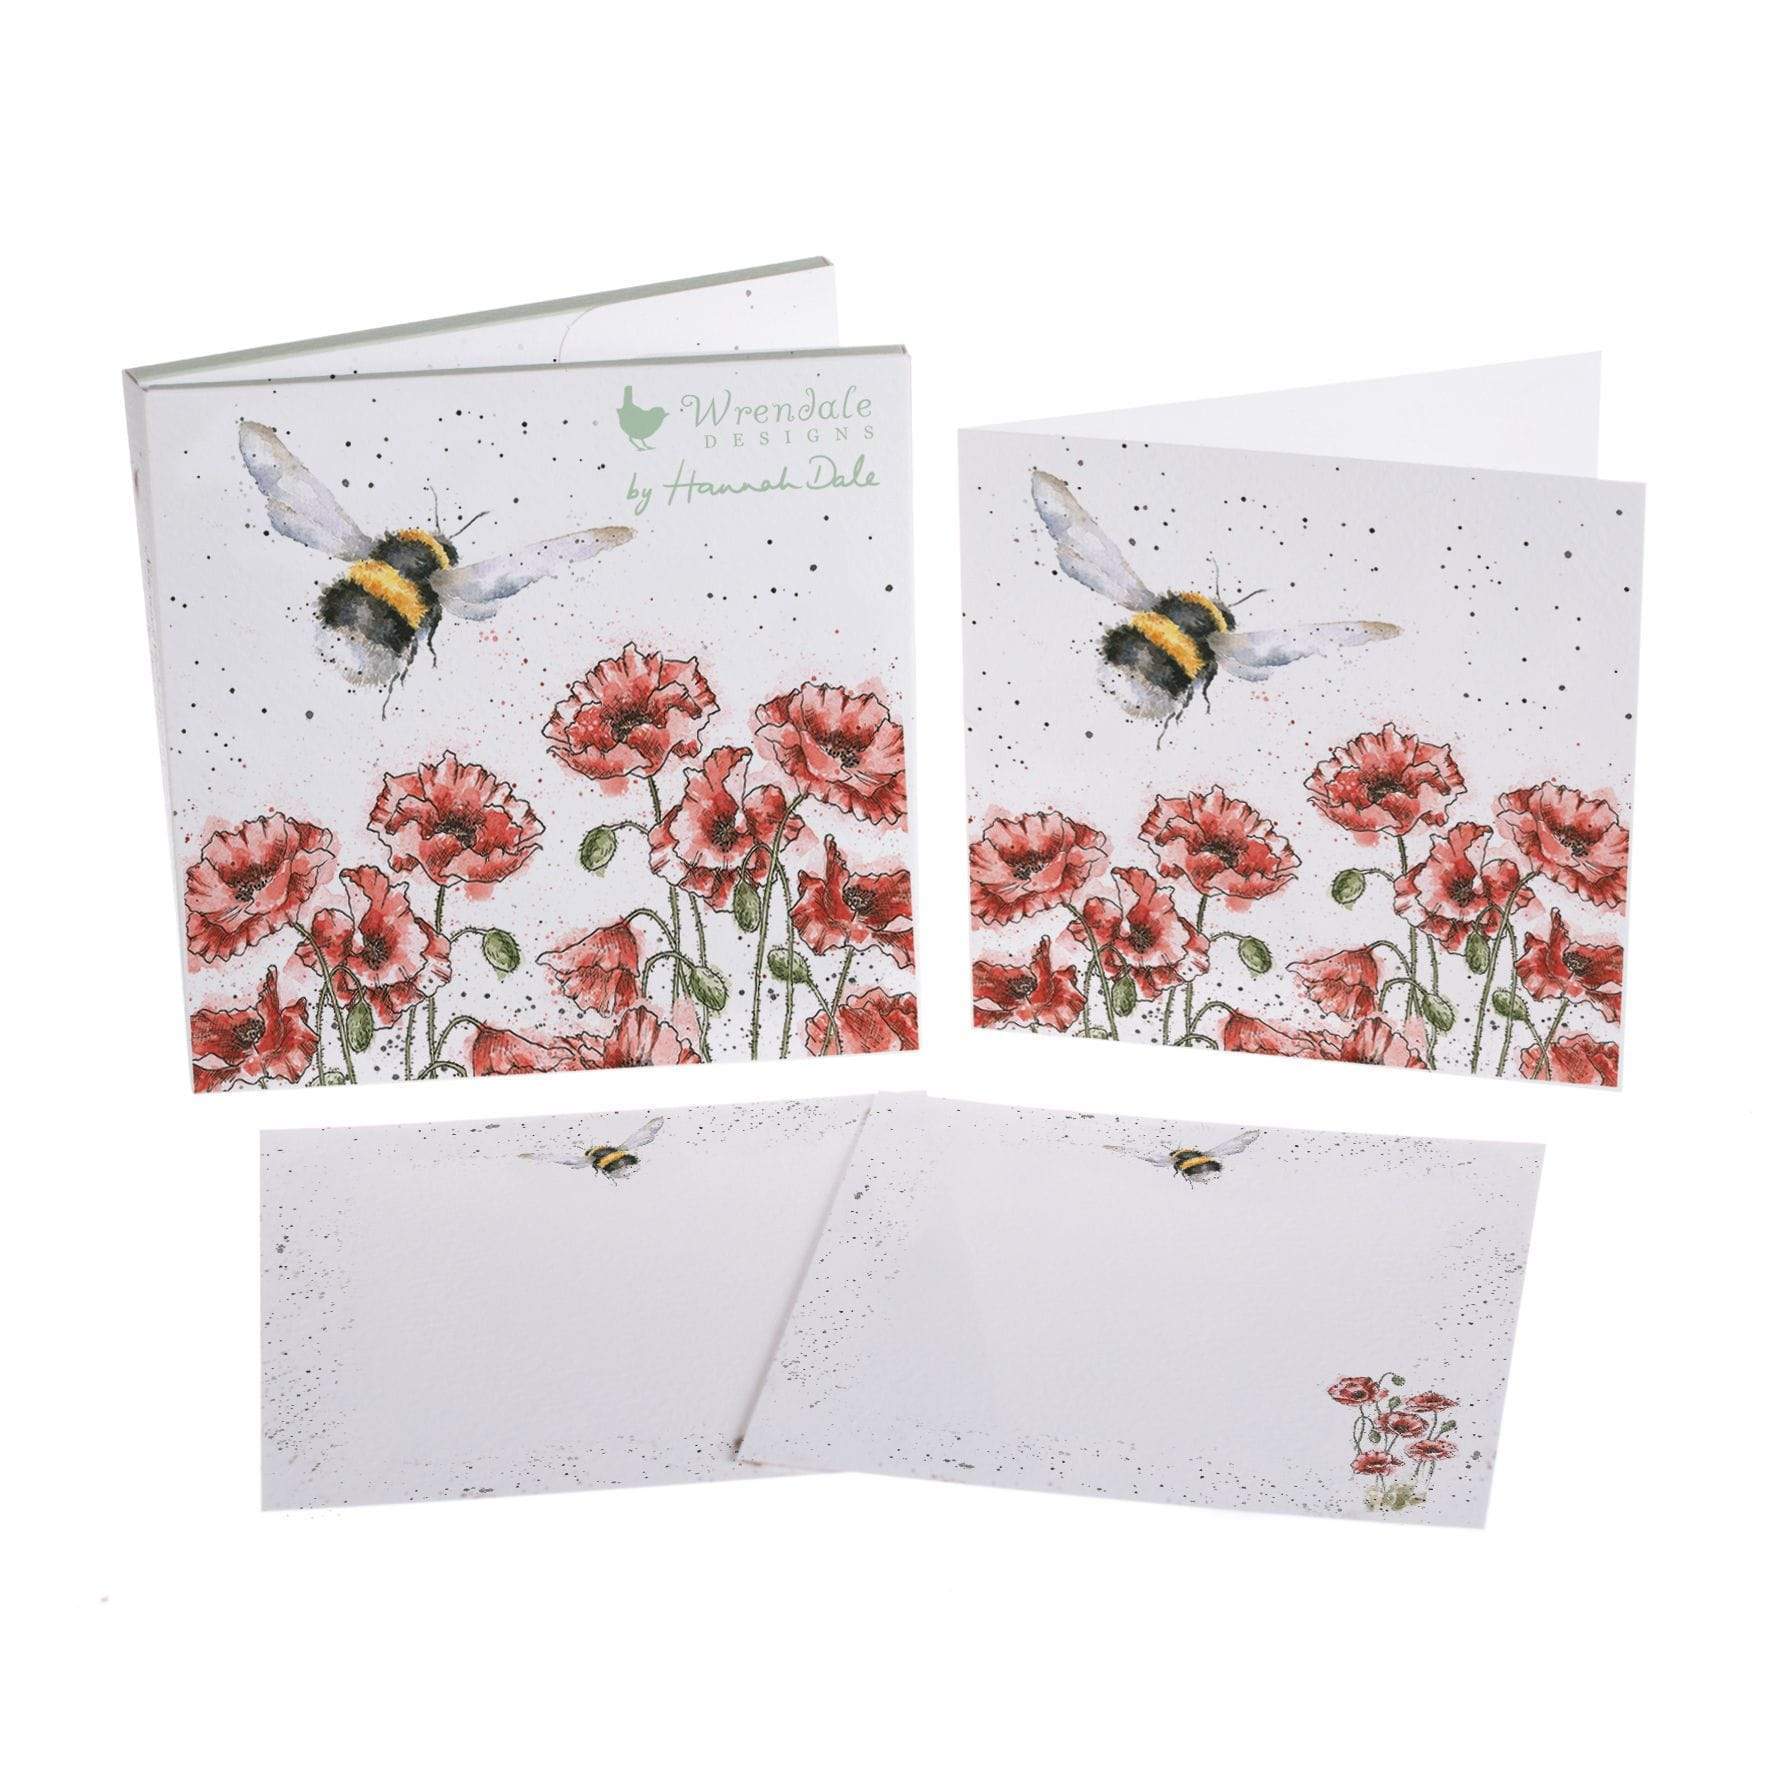 Wrendale Designs Greeting Card Wrendale Note & Correspondance Card Pack - Flight of the Bumblebee